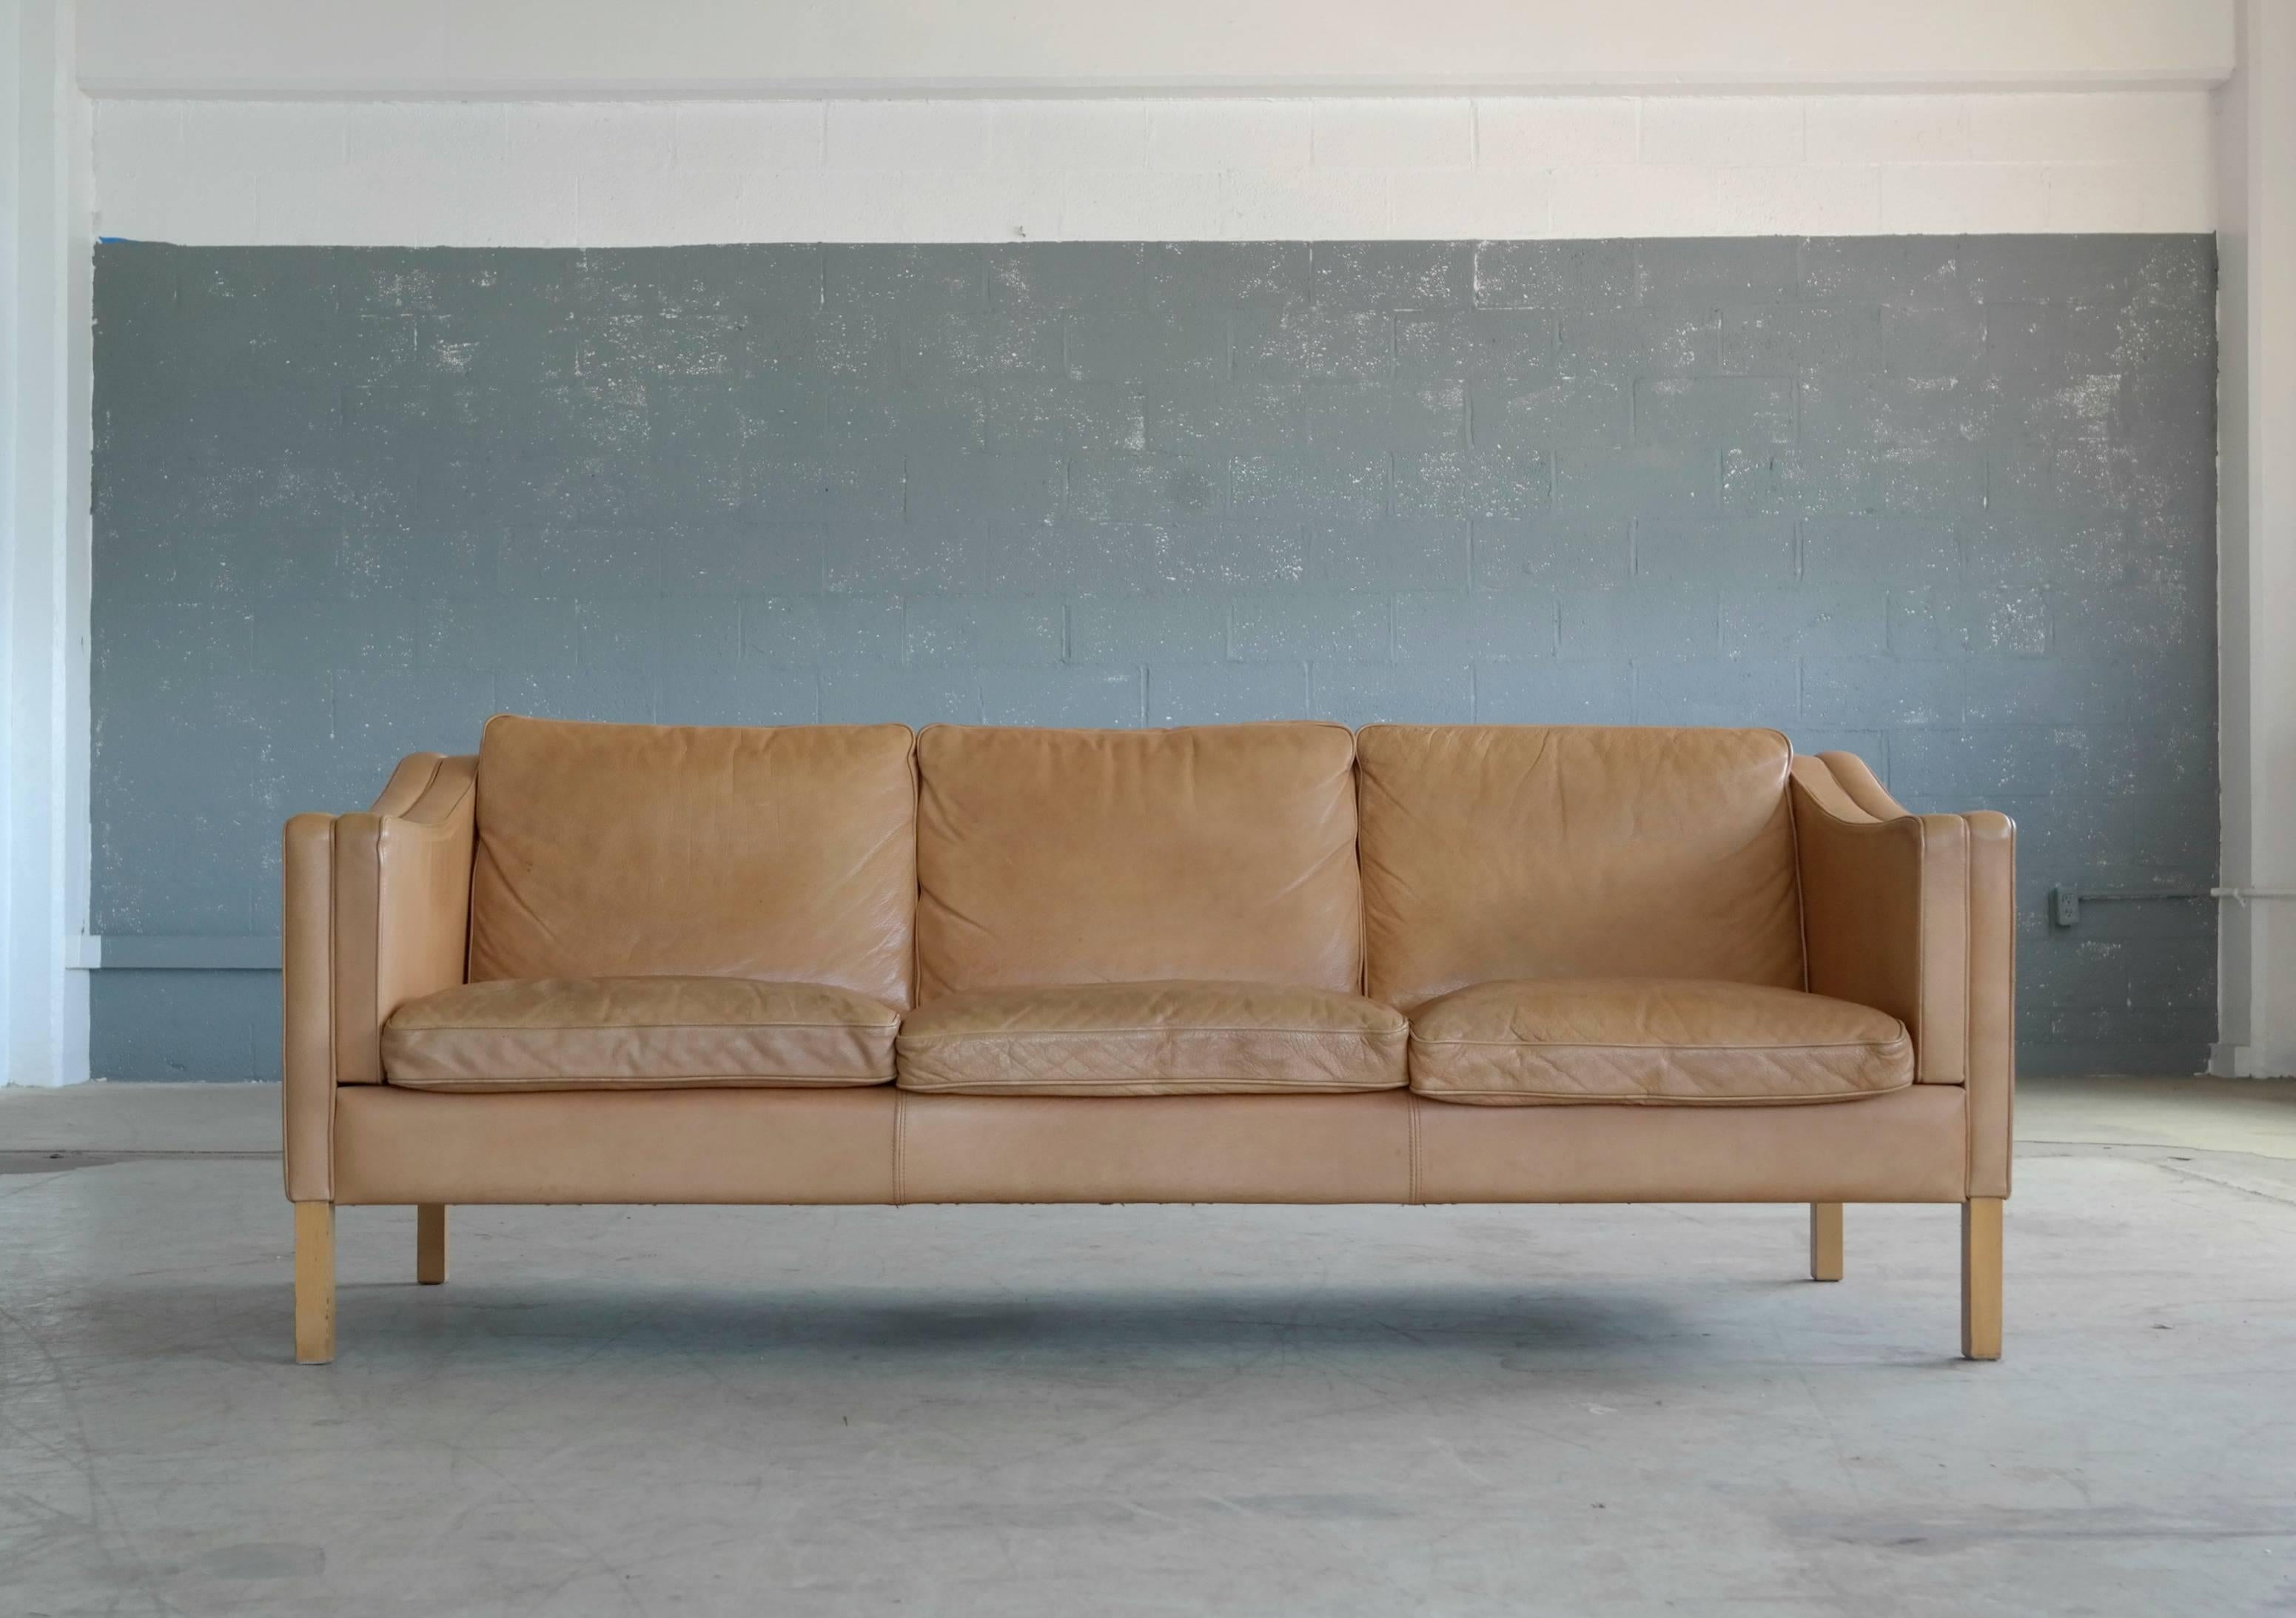 Late 20th Century Børge Mogensen Style Three-Seat Sofa Model 2213 in Tan Leather by Stouby Mobler